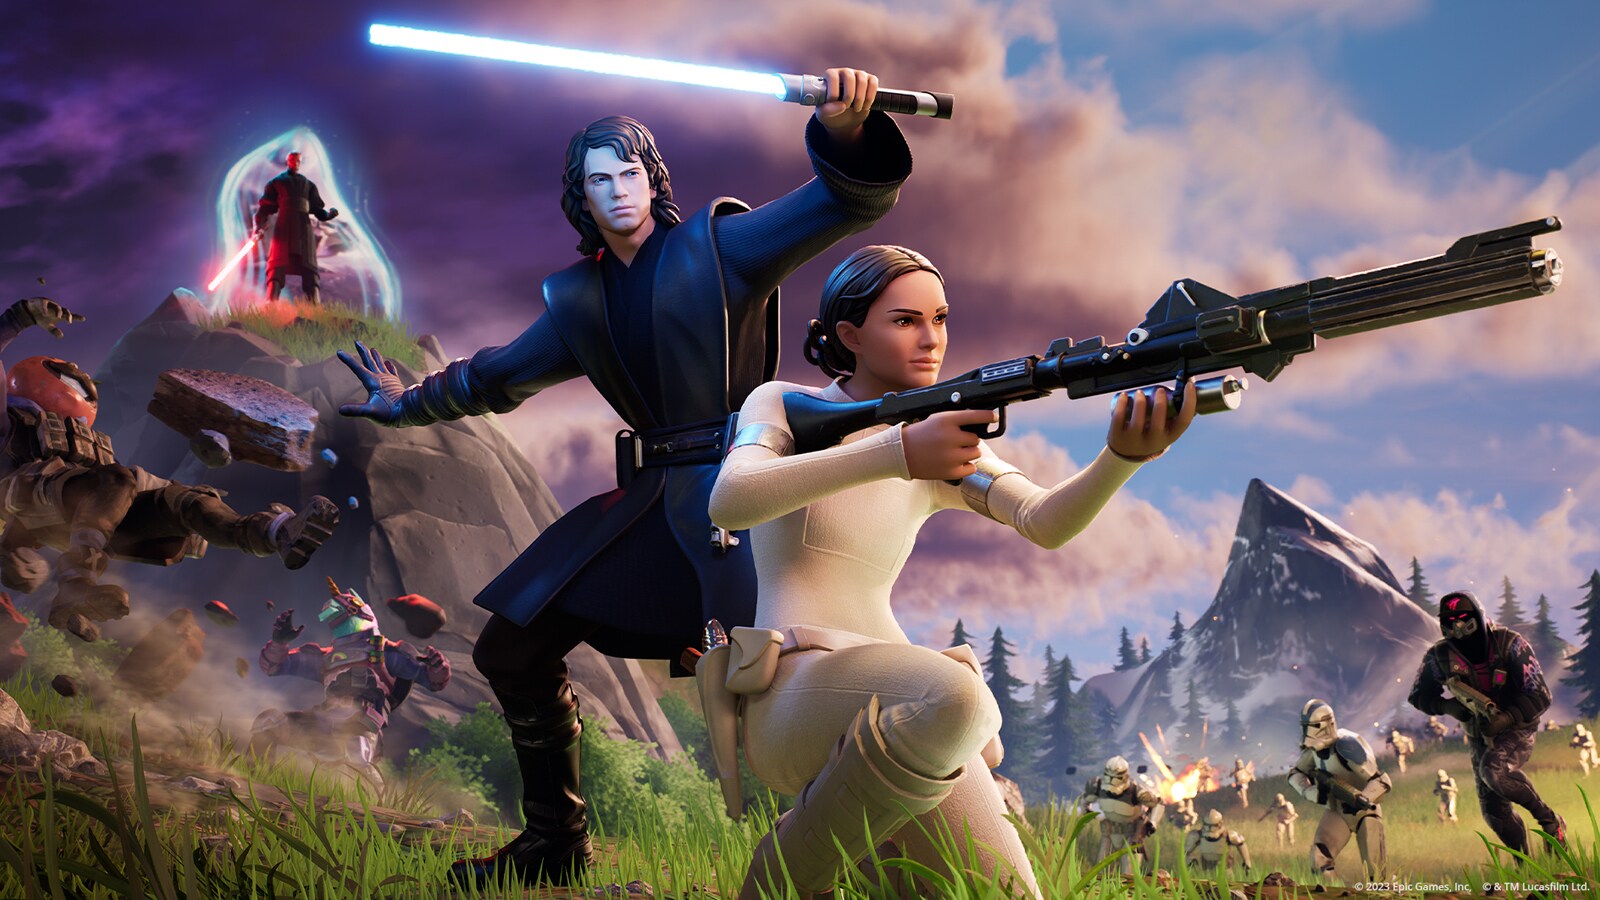 Celebrate STAR WARS™ with The Epic Games Store and Fortnite! - Epic Games  Store